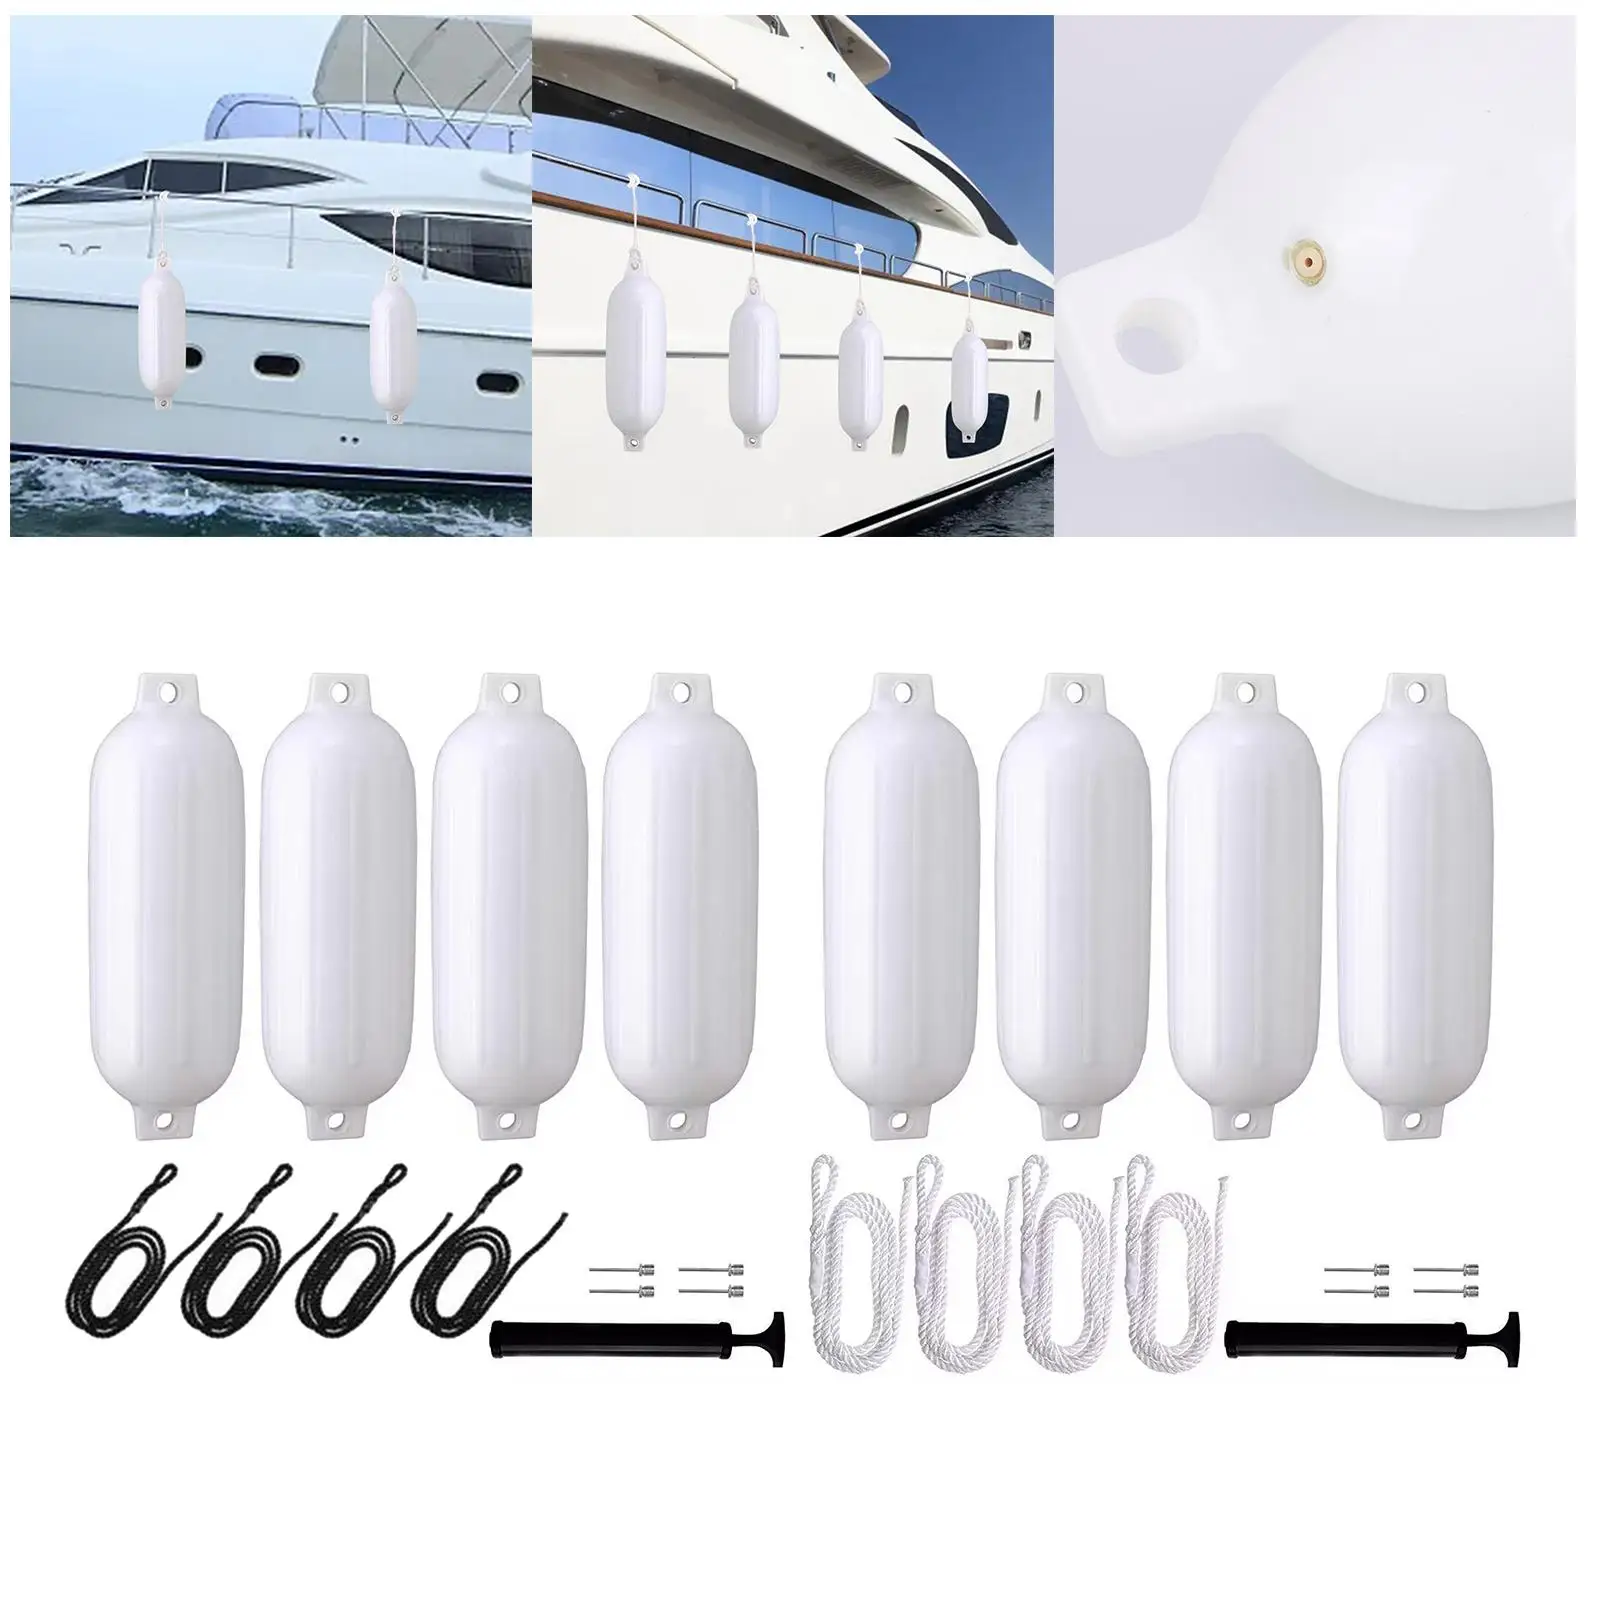 4x Boat Fender Inflatable Marine Boat Bumper for Docking Fishing Boats